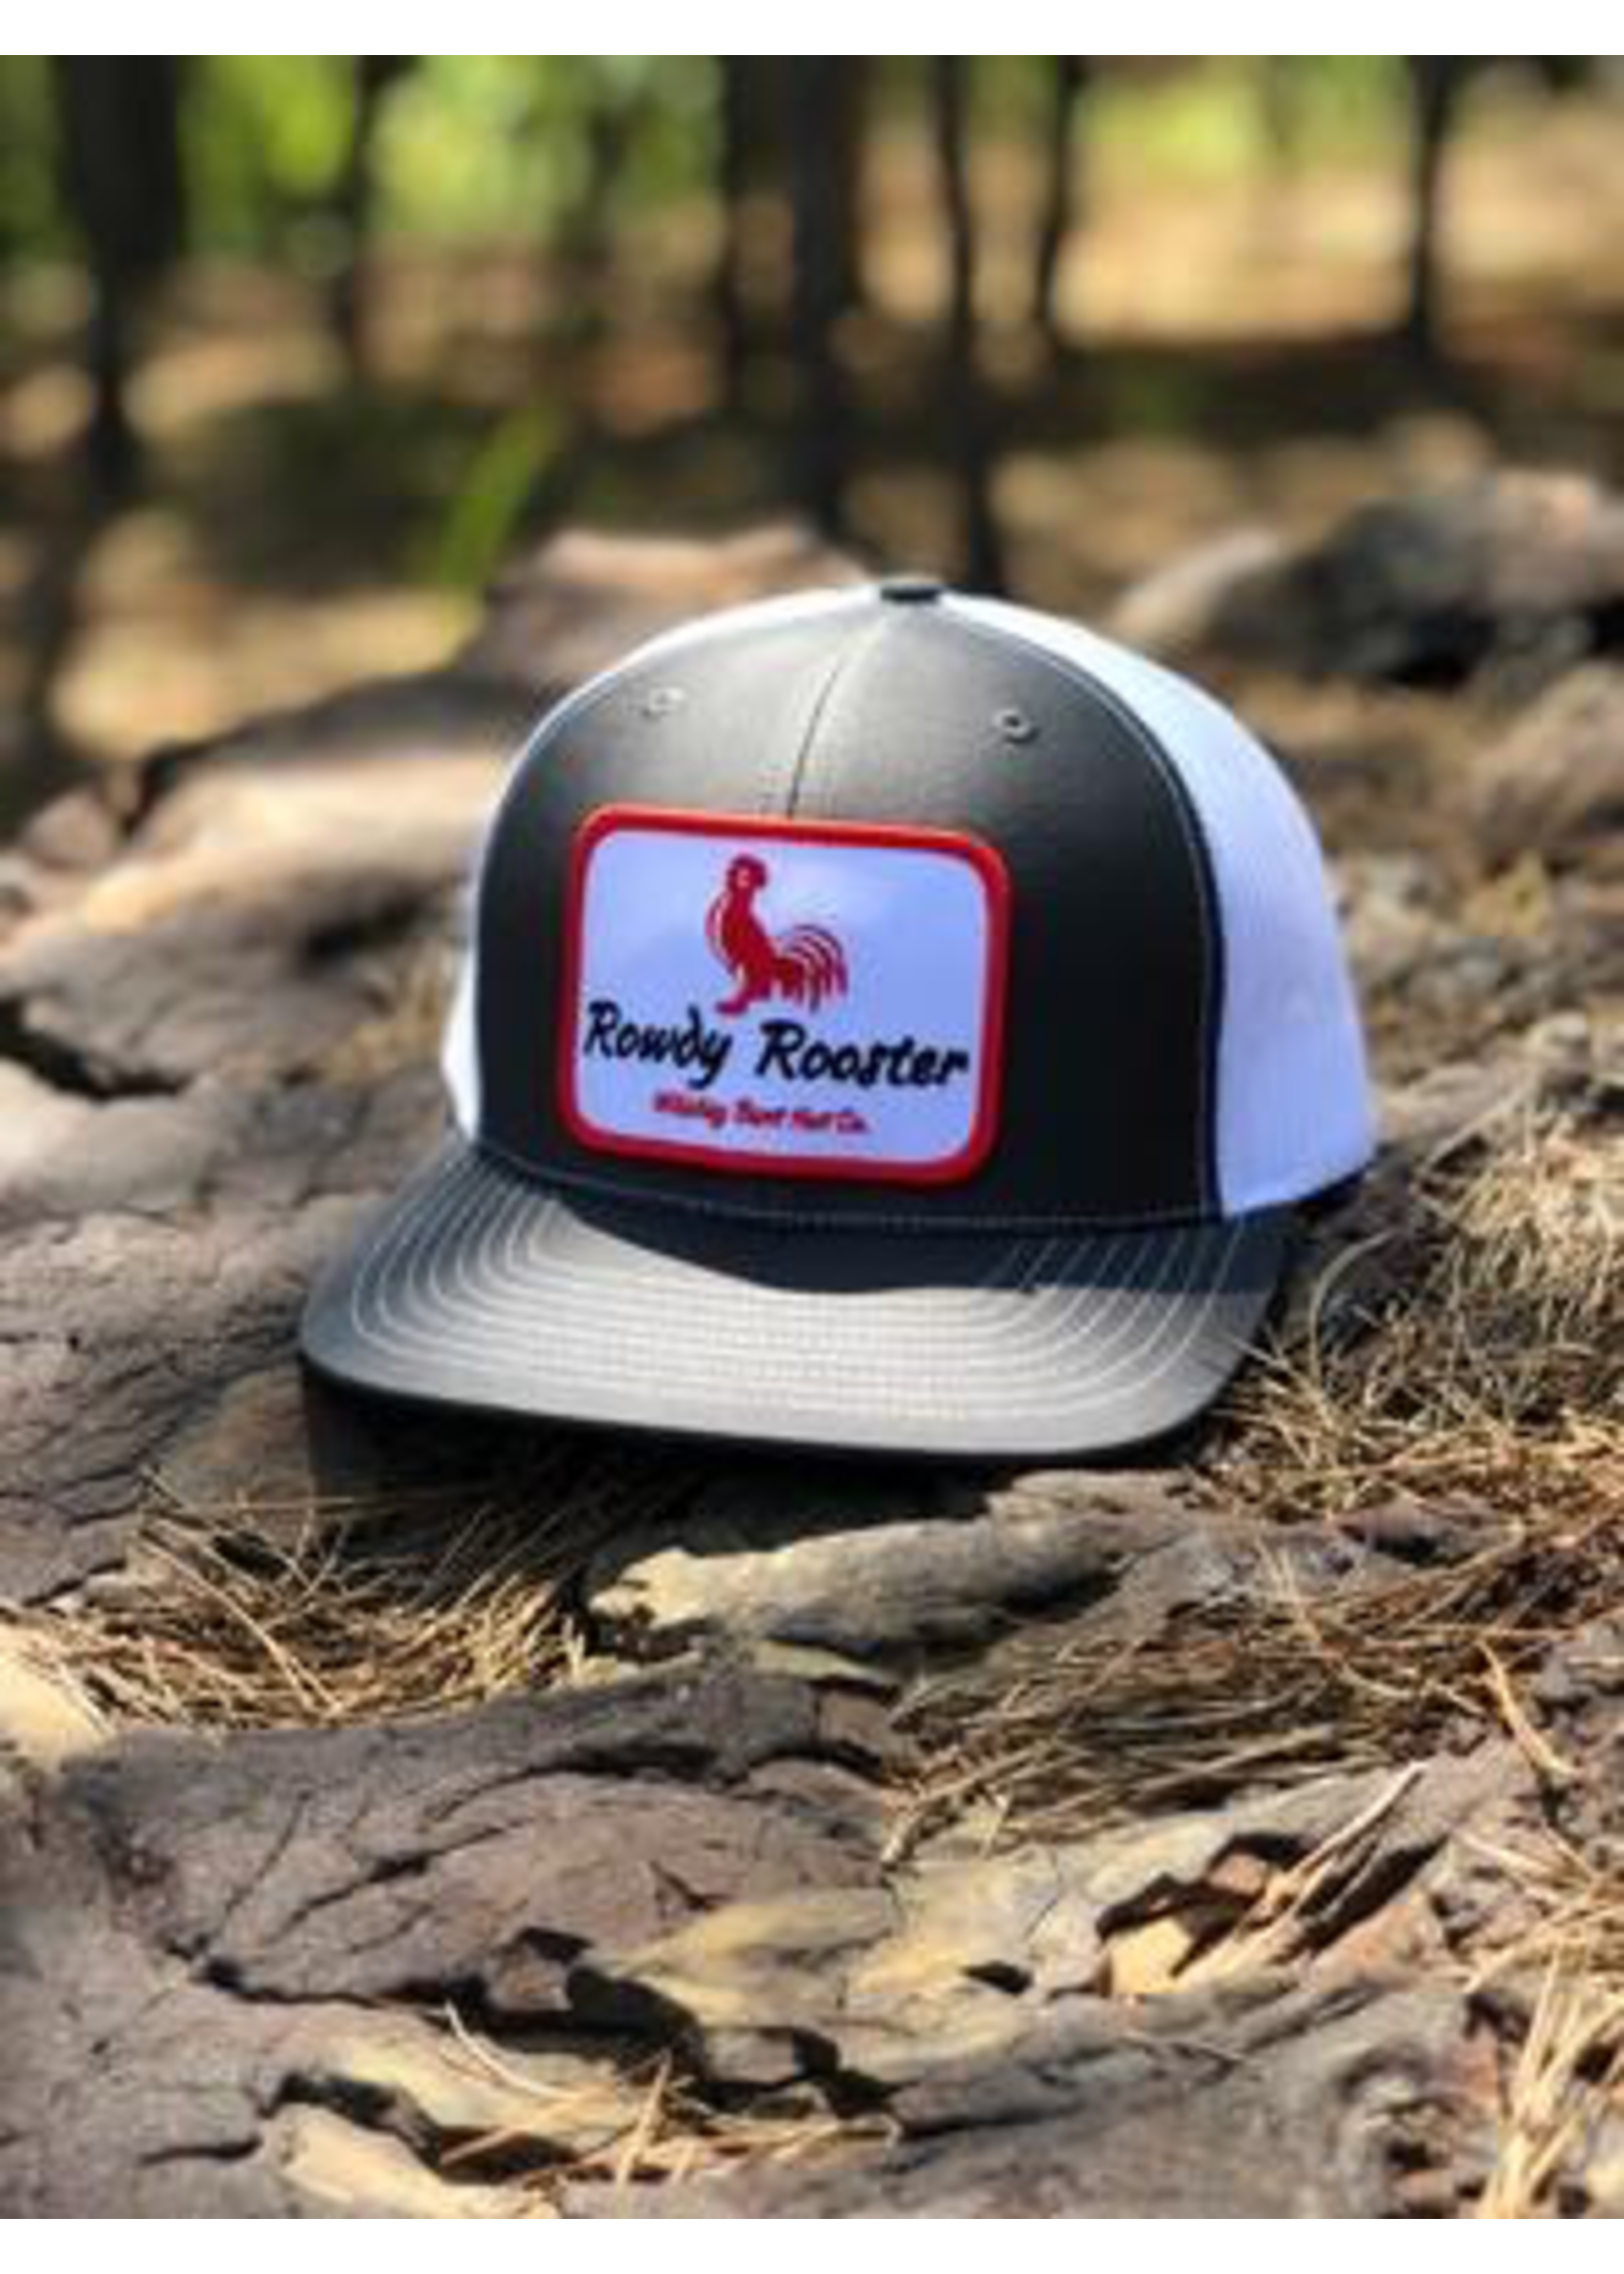 WHISKEY BENT HAT CO. Rowdy Rooster